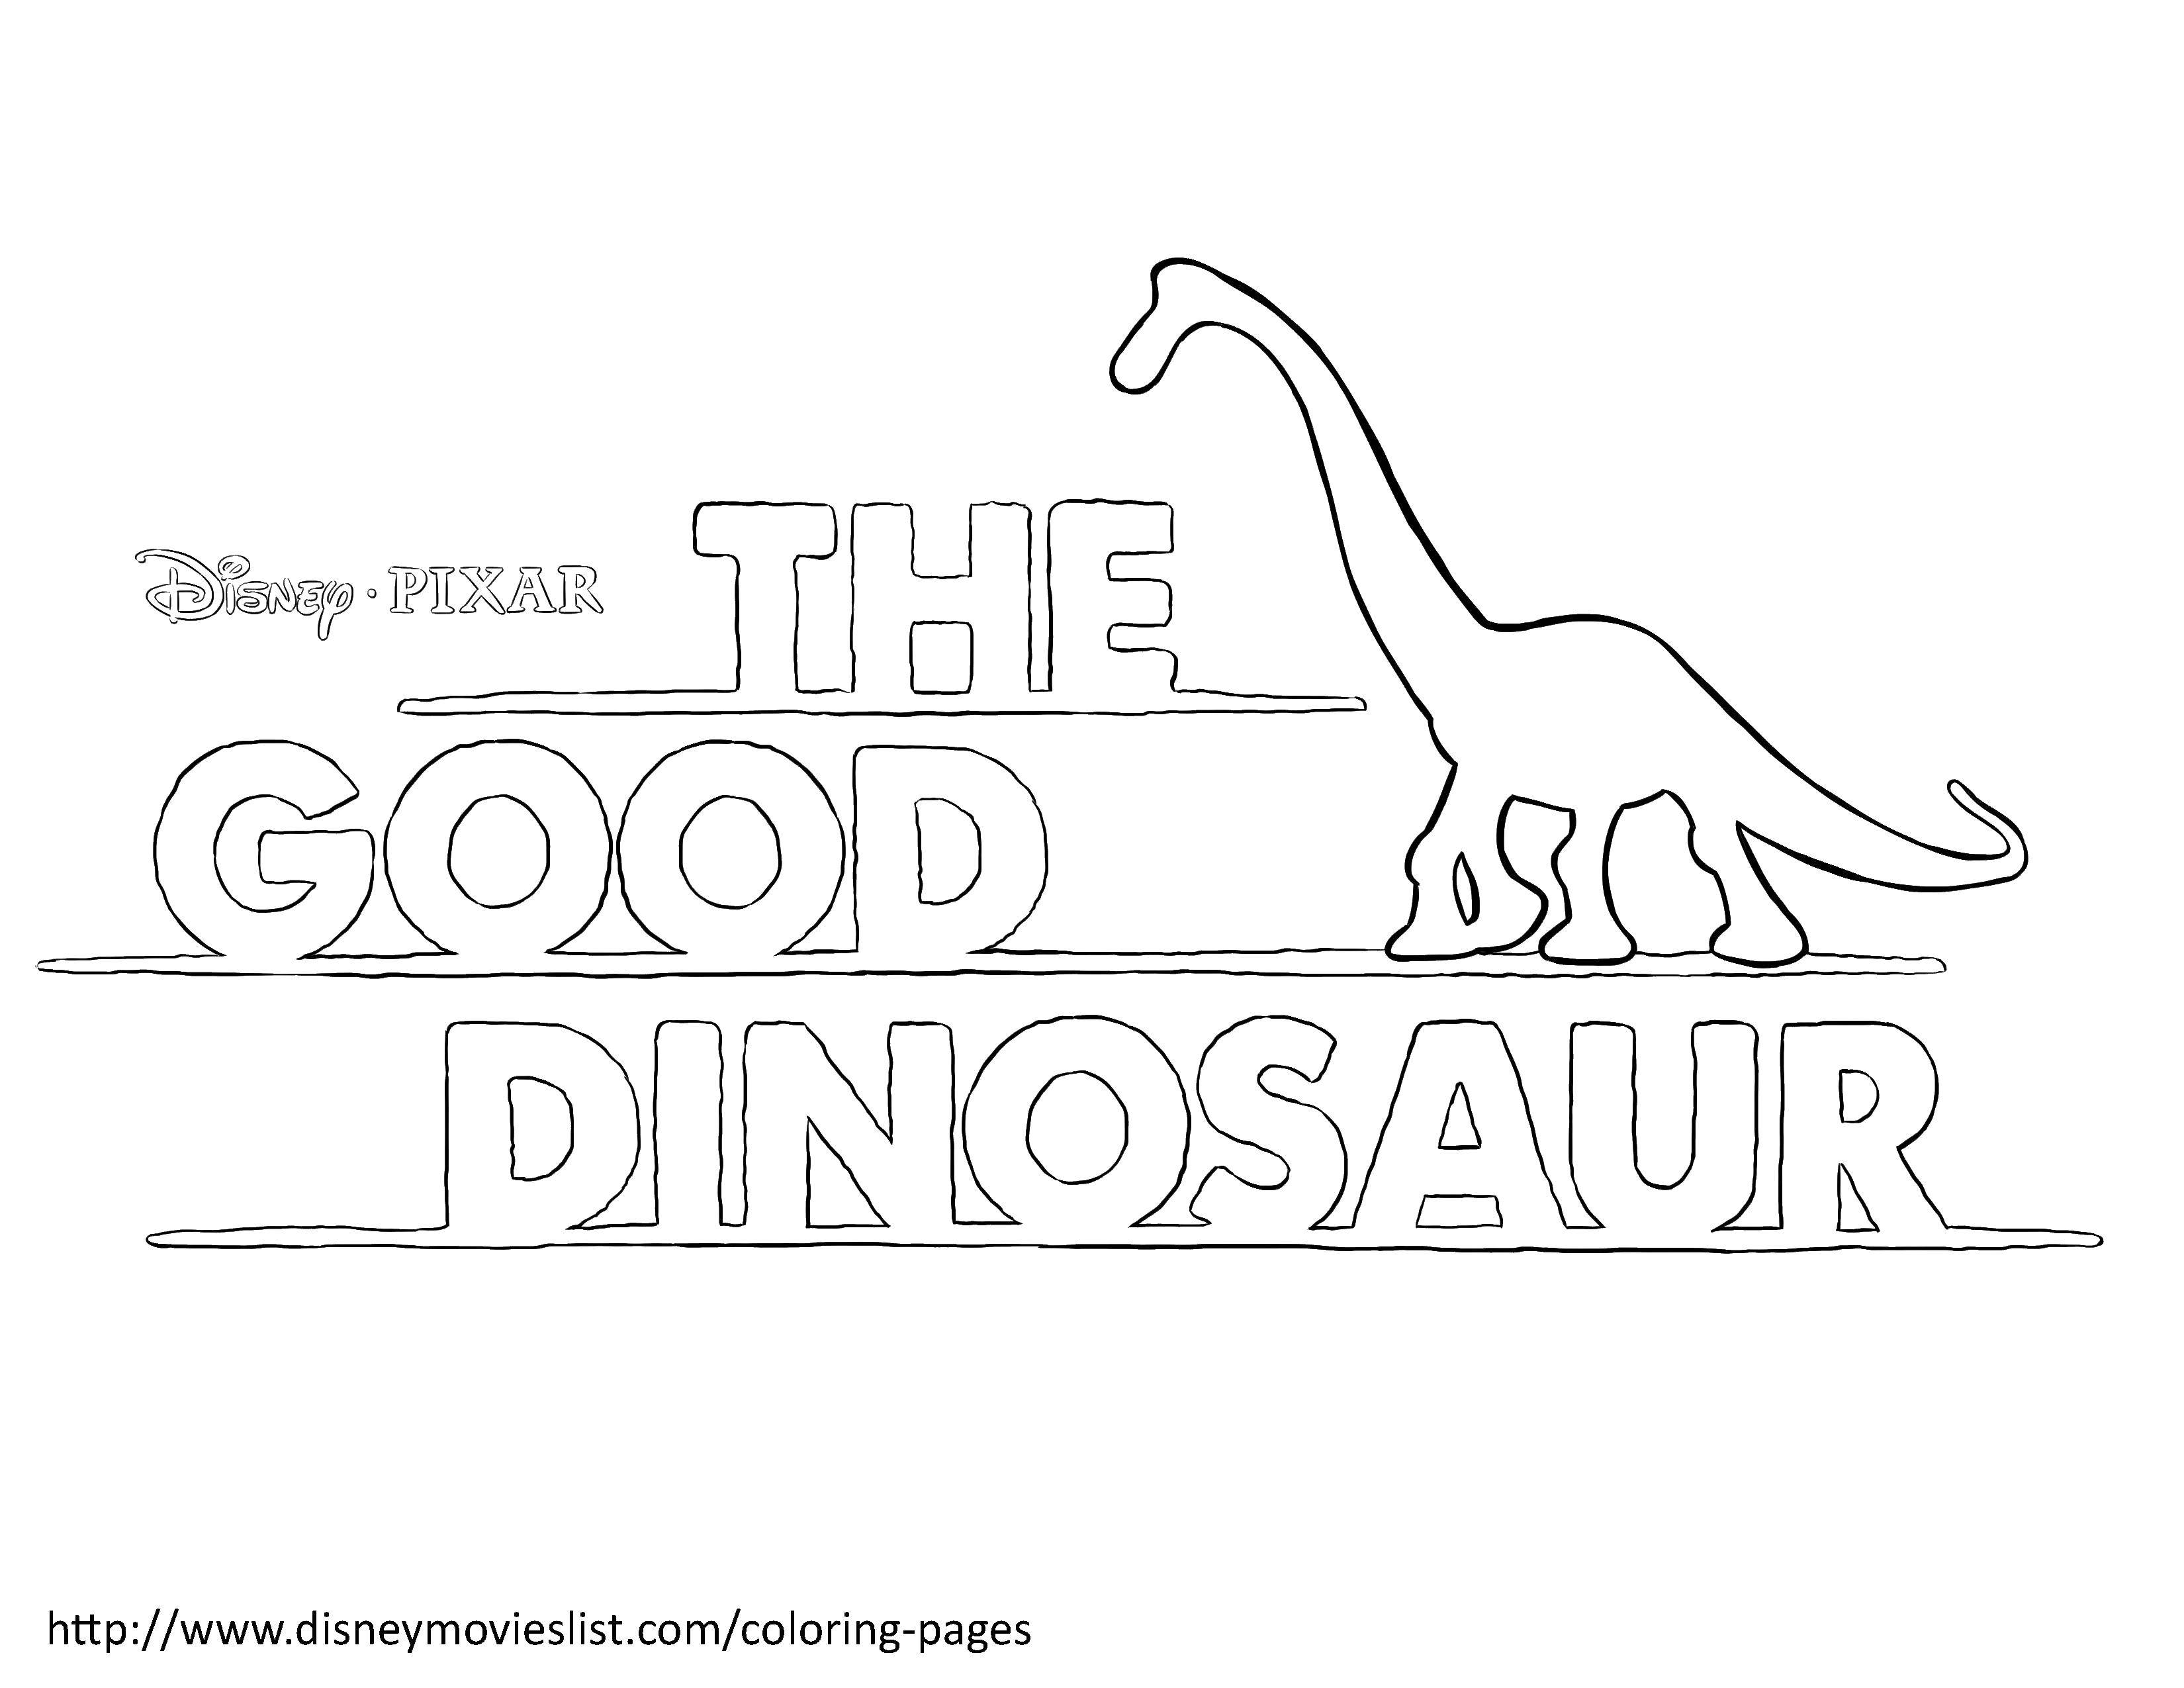 Coloring The good dinosaur. Category Disney cartoons. Tags:  Disney cartoons, dinosaurs.